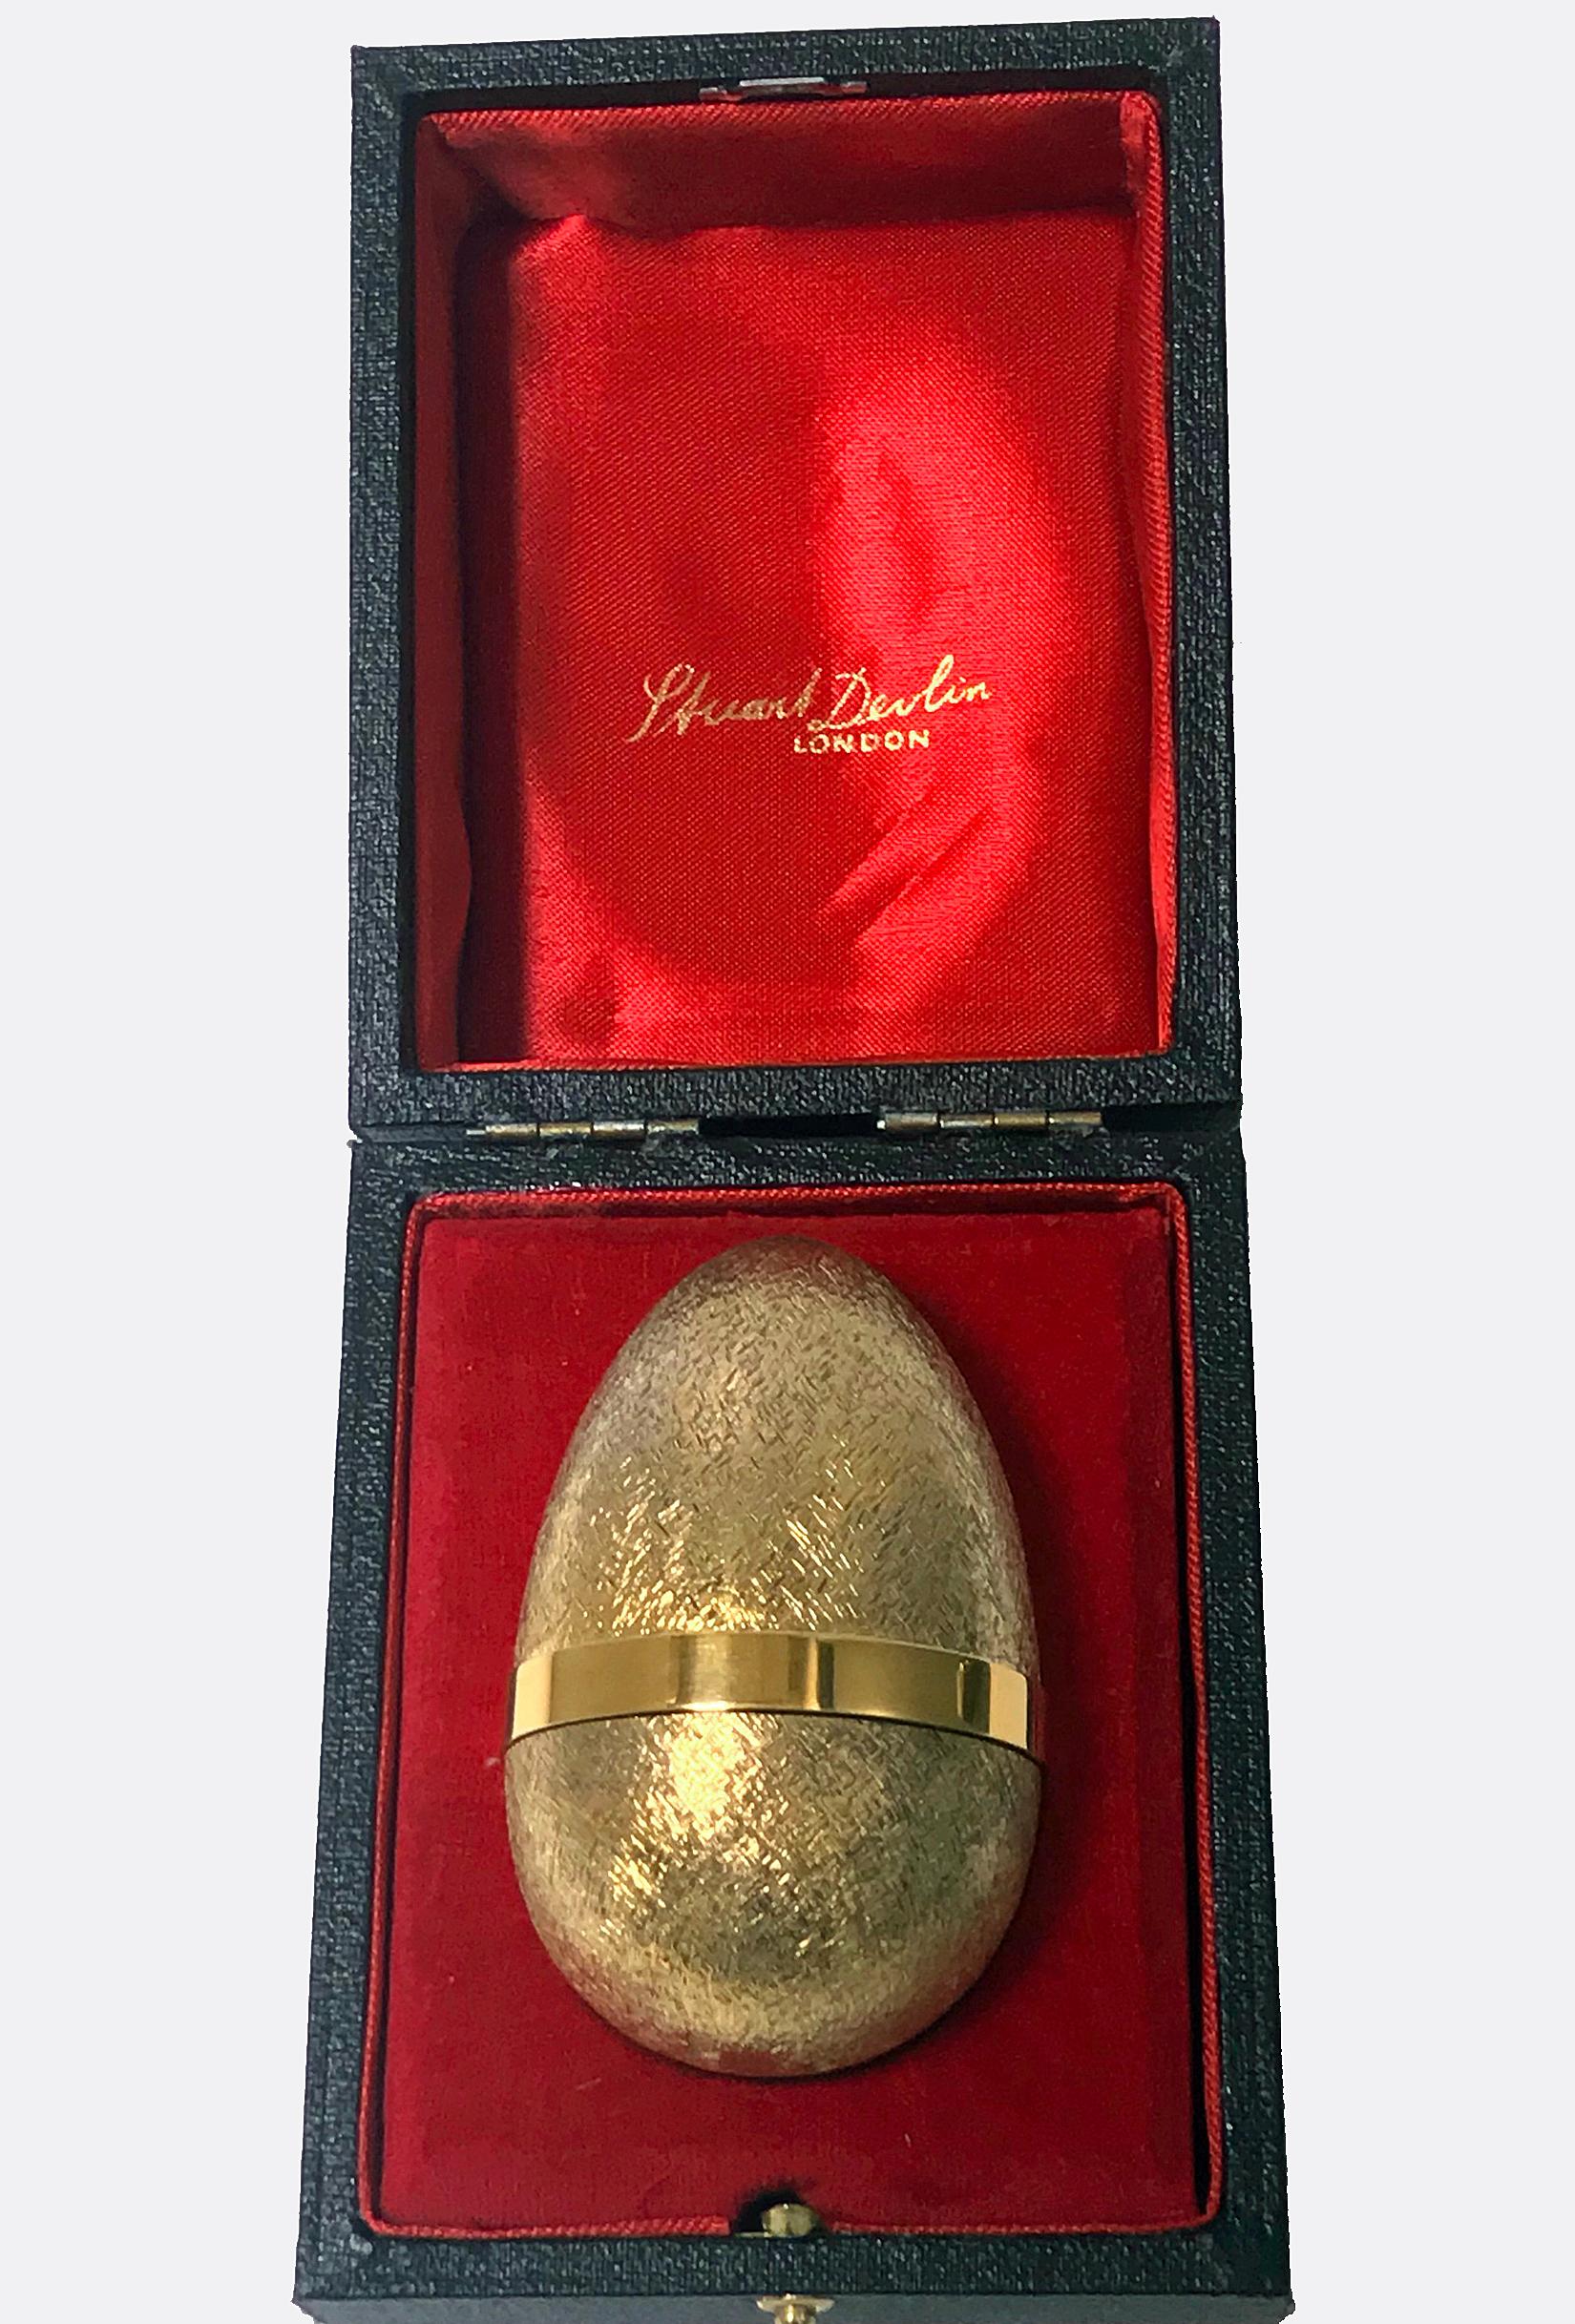 Stuart Devlin silver gilt surprise chicken egg, London 1981, opening to reveal a chicken standing over a baby chick hatching. Original box. Height 7.5cm high, no 19 of limited edition. Item weight: 138 grams.